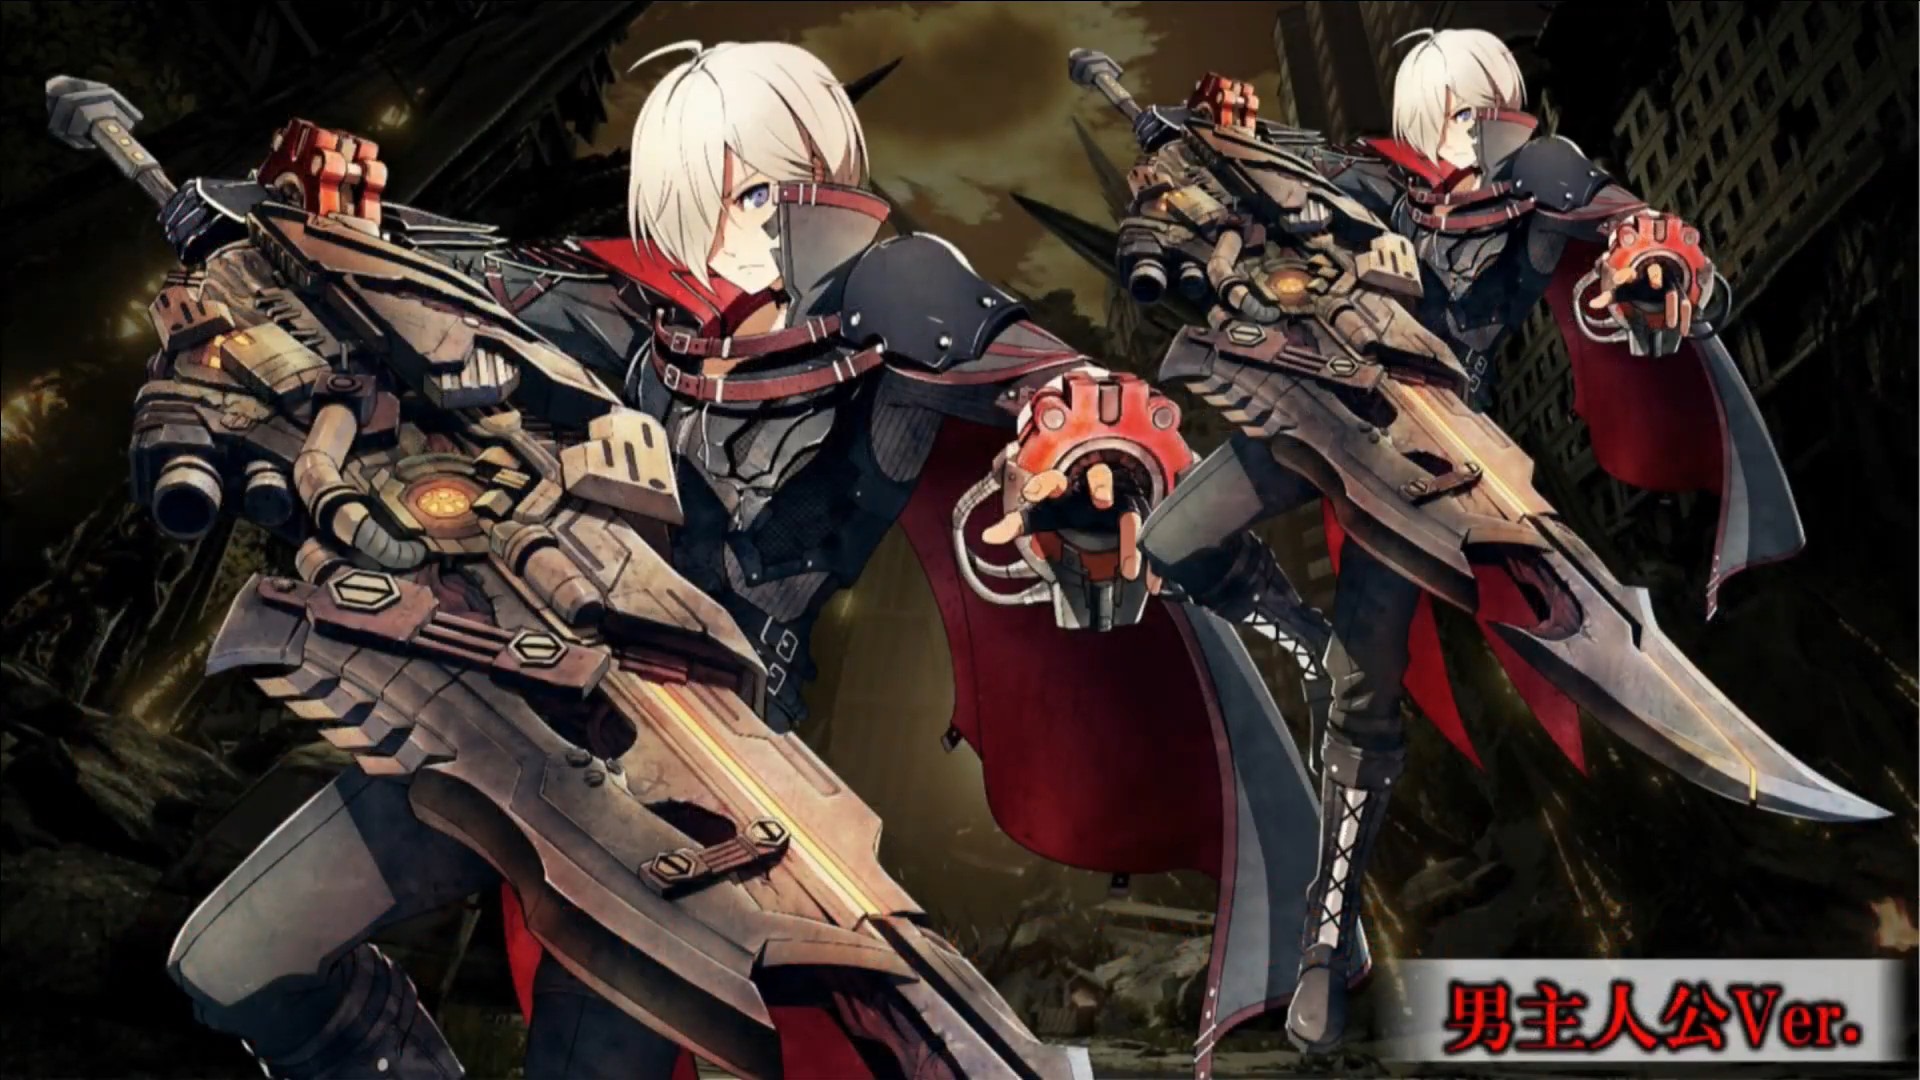 God Eater 3 x Code Vein Collaboration Costumes And Bonuses - Siliconera